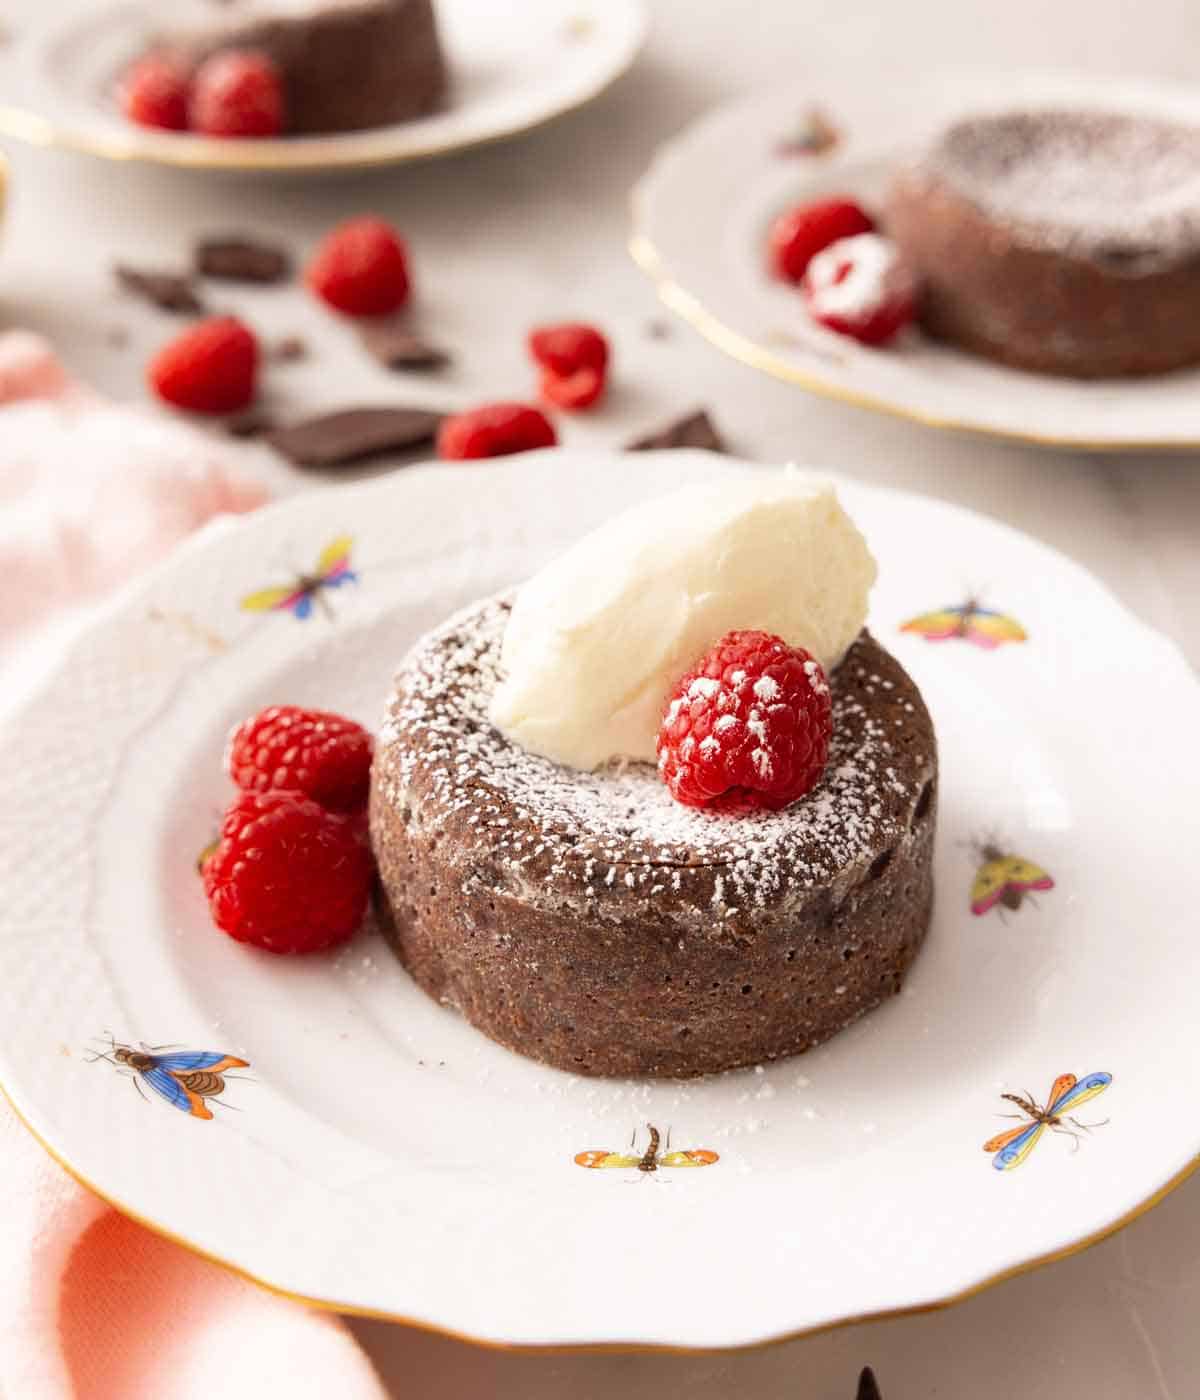 A chocolate lava cake with raspberries, a scoop of ice cream, and powdered sugar on top.